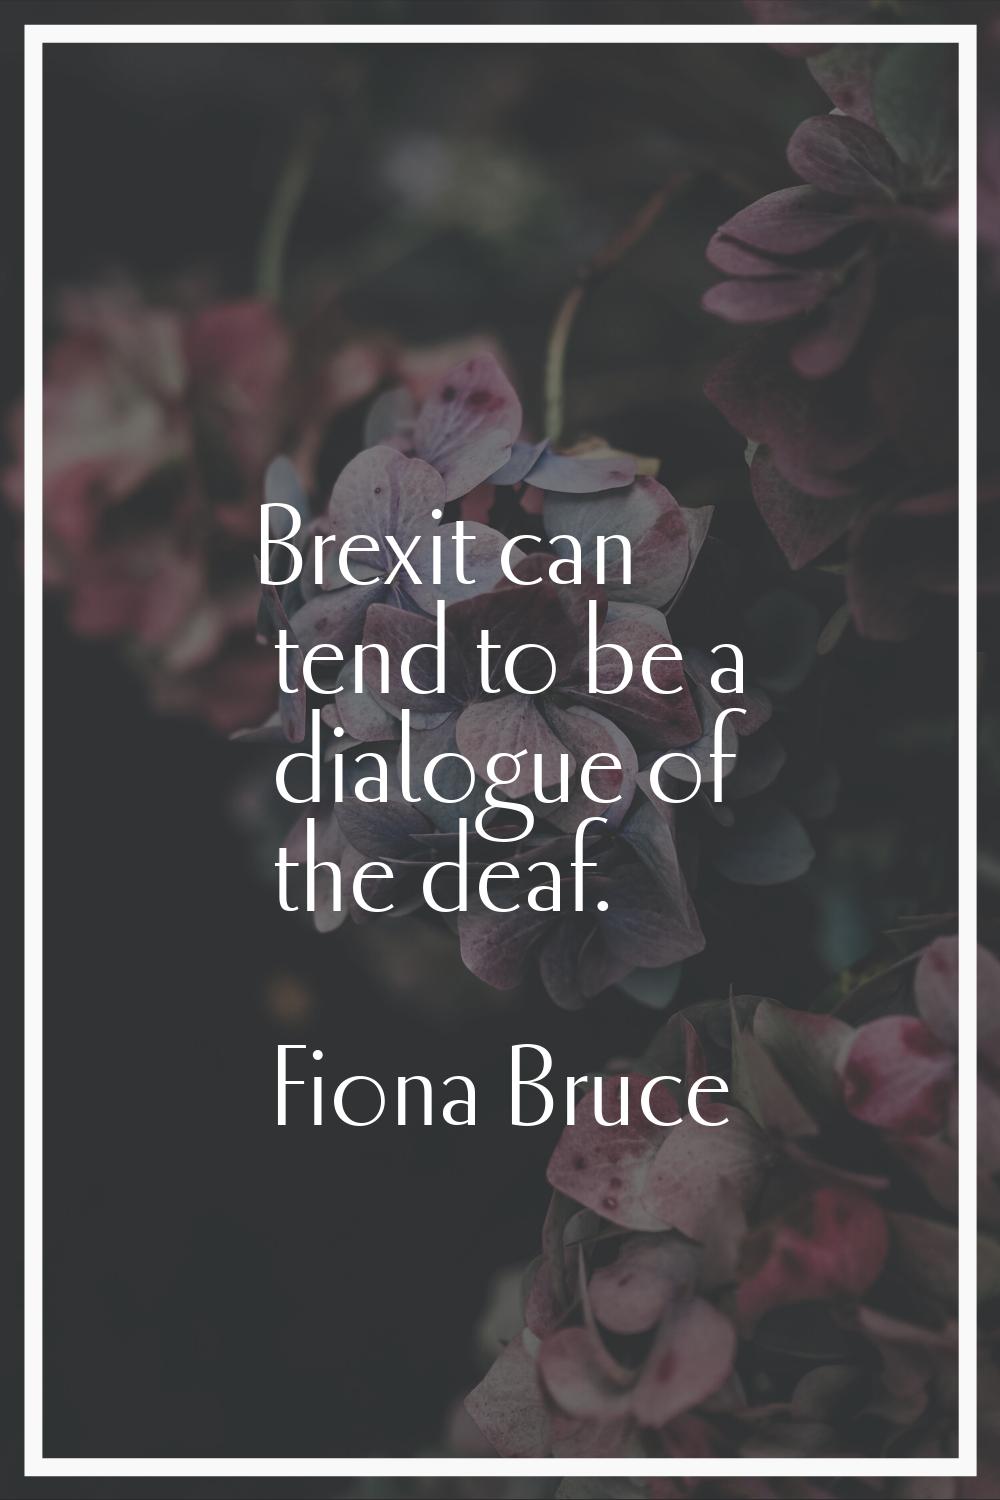 Brexit can tend to be a dialogue of the deaf.